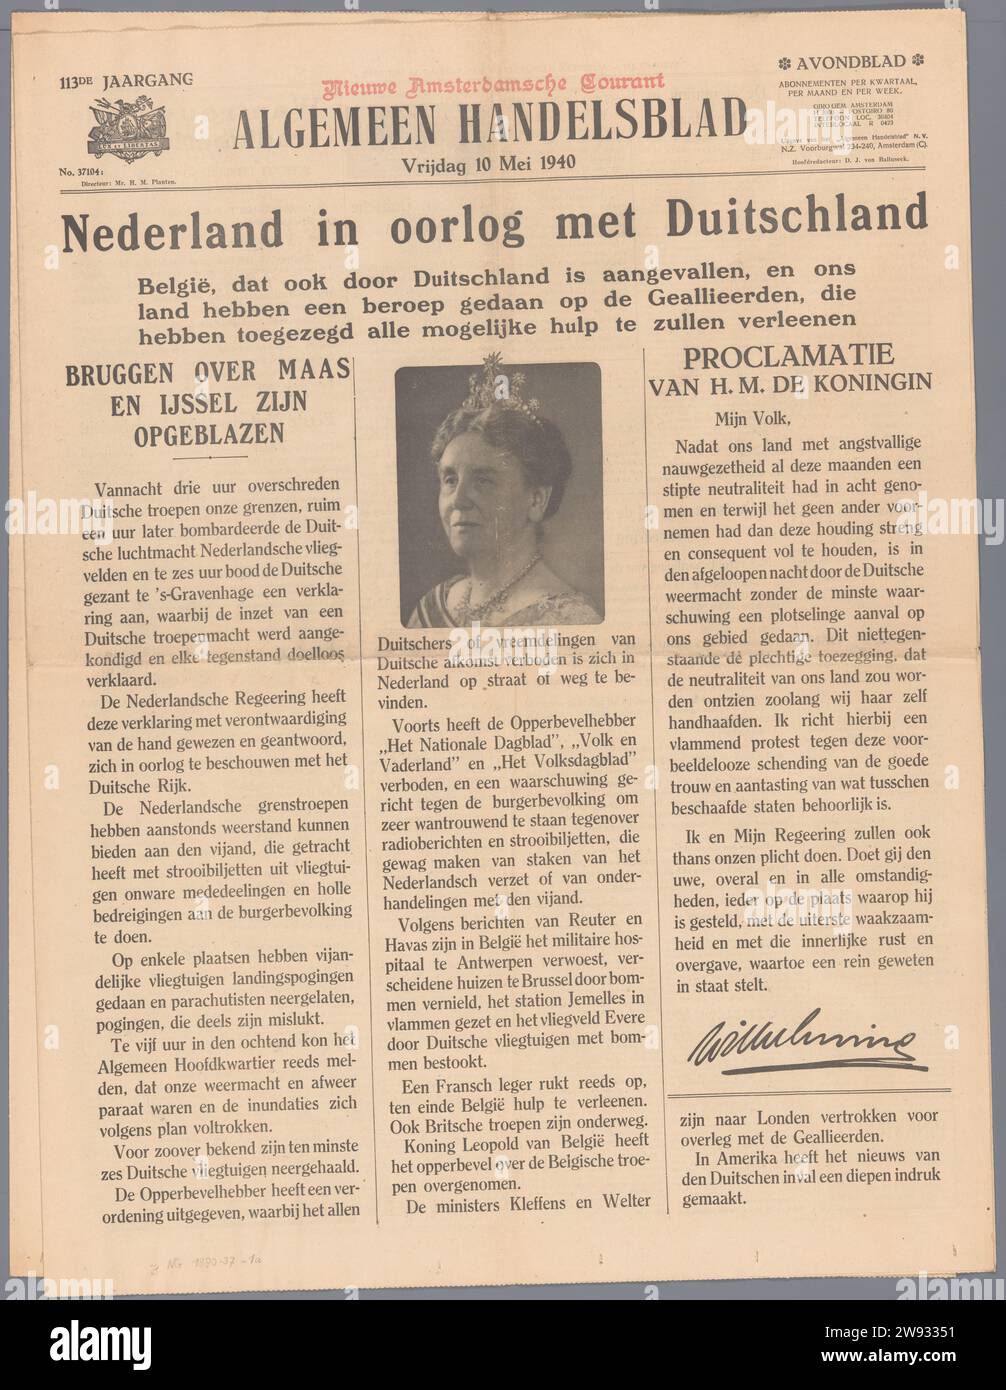 Algemeen Handelsblad, 10 May 1940, Algemeen Handelsblad, 1940  Newspaper, 12 pp; No. 37104, 113rd volume of the Algemeen Handelsblad, about the German robbery in the Netherlands and the first measures of the occupier. Marked; L.B.: Weapon with saying: 'Lux et libertas'. Dated. Inscription; b.: 'The Netherlands at war with Germany'. Amsterdam paper printing  Netherlands Stock Photo